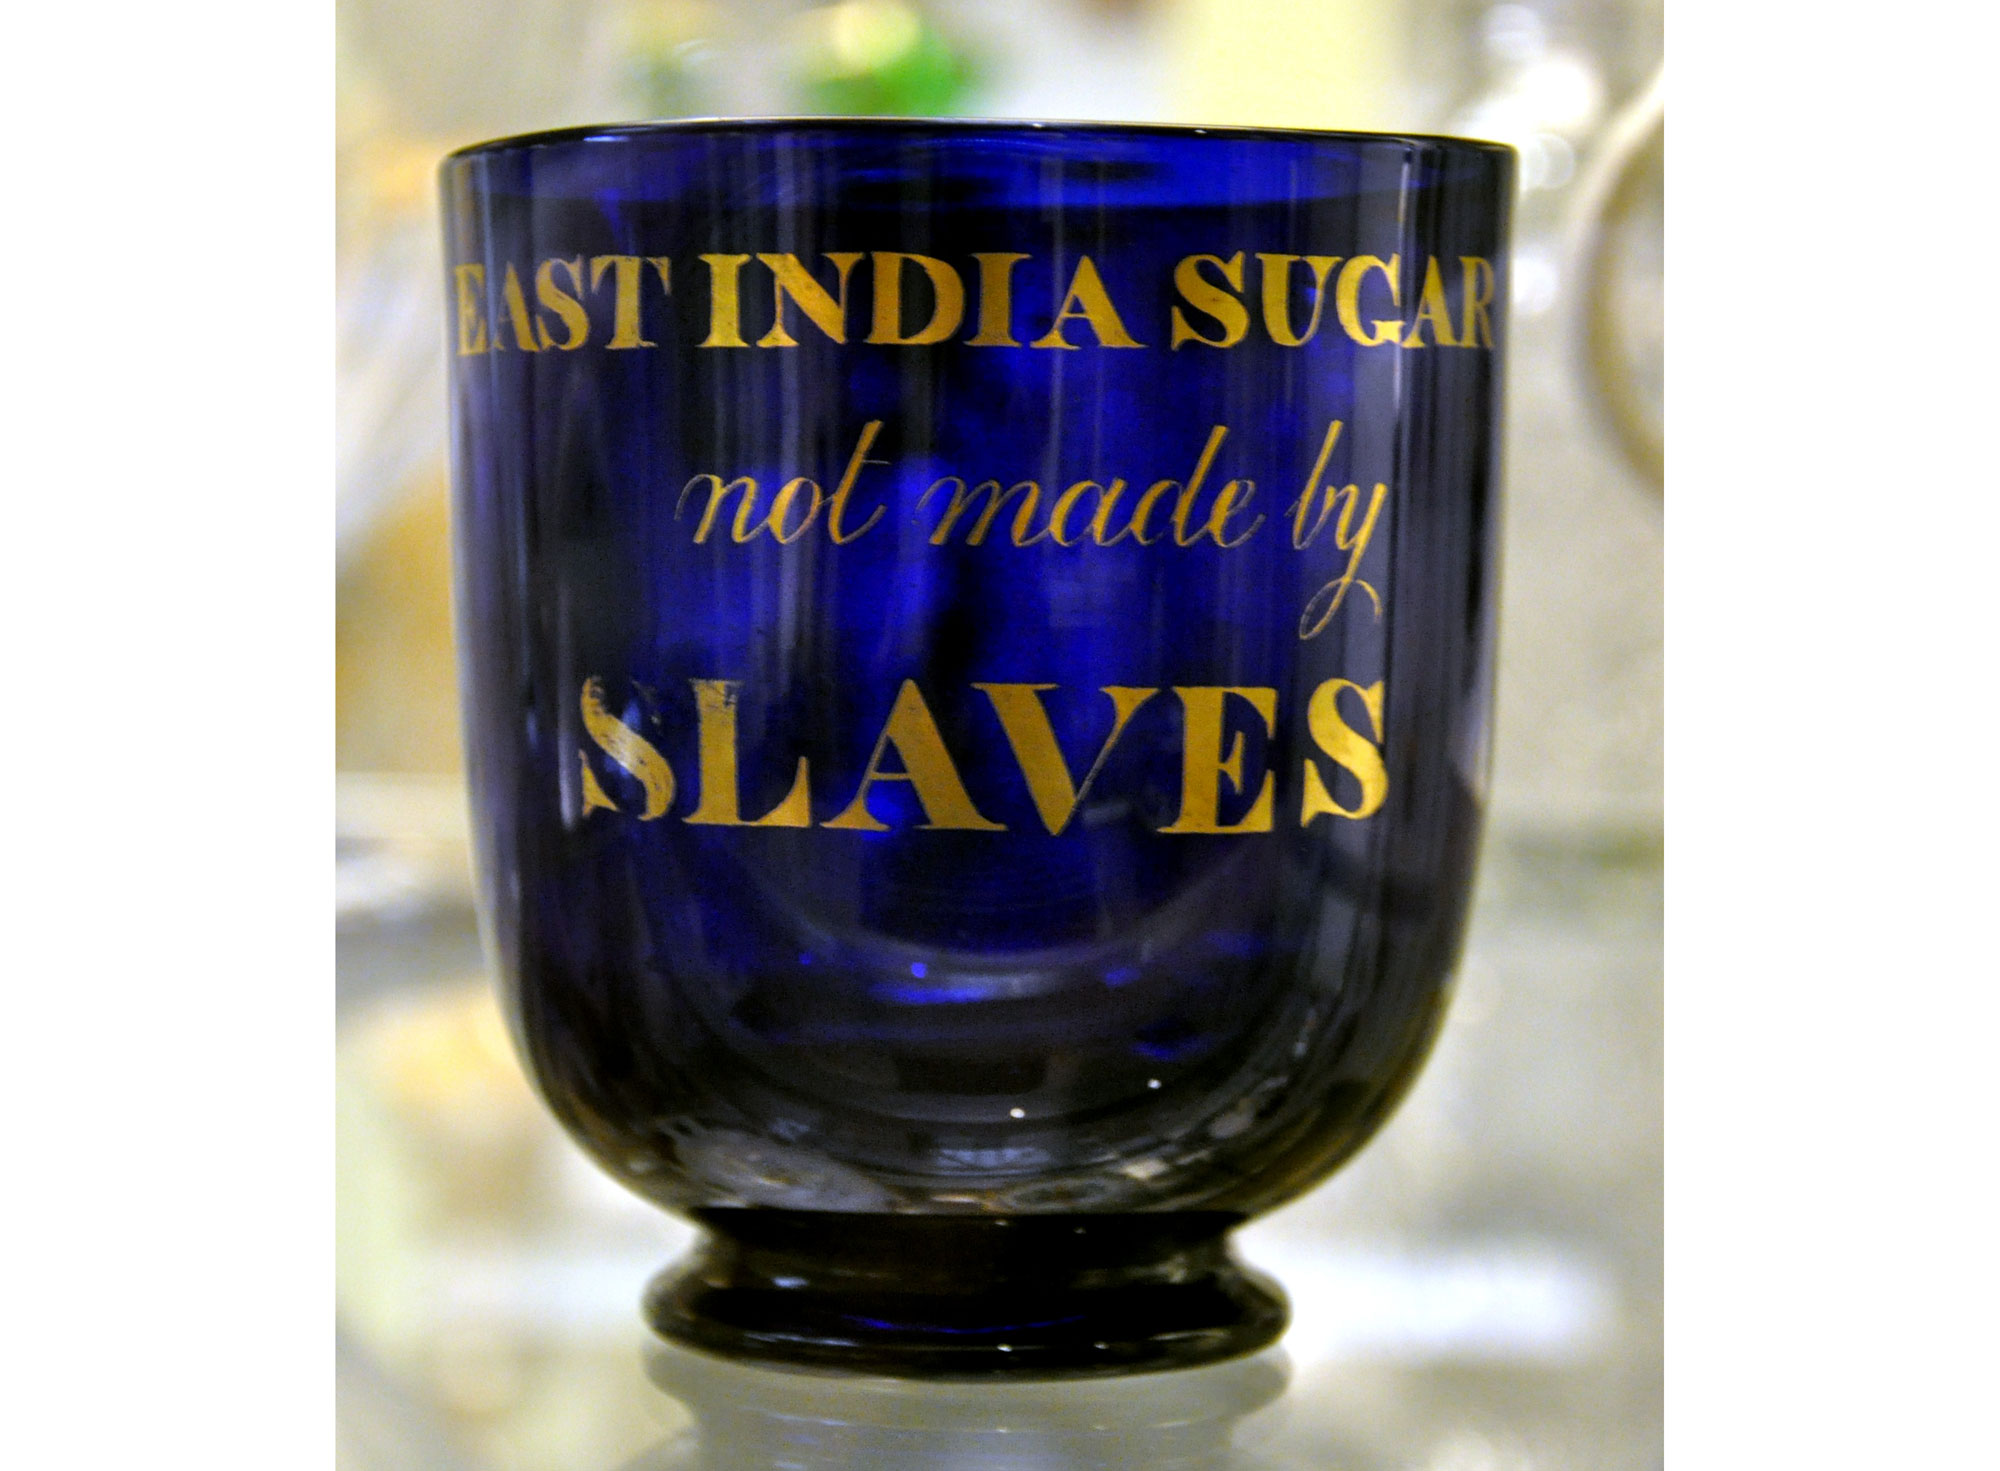 Photograph of a dark blue glass sugarbowl. The sugarbowl has gold lettering on it that says "East India Sugar not made by Slaves."